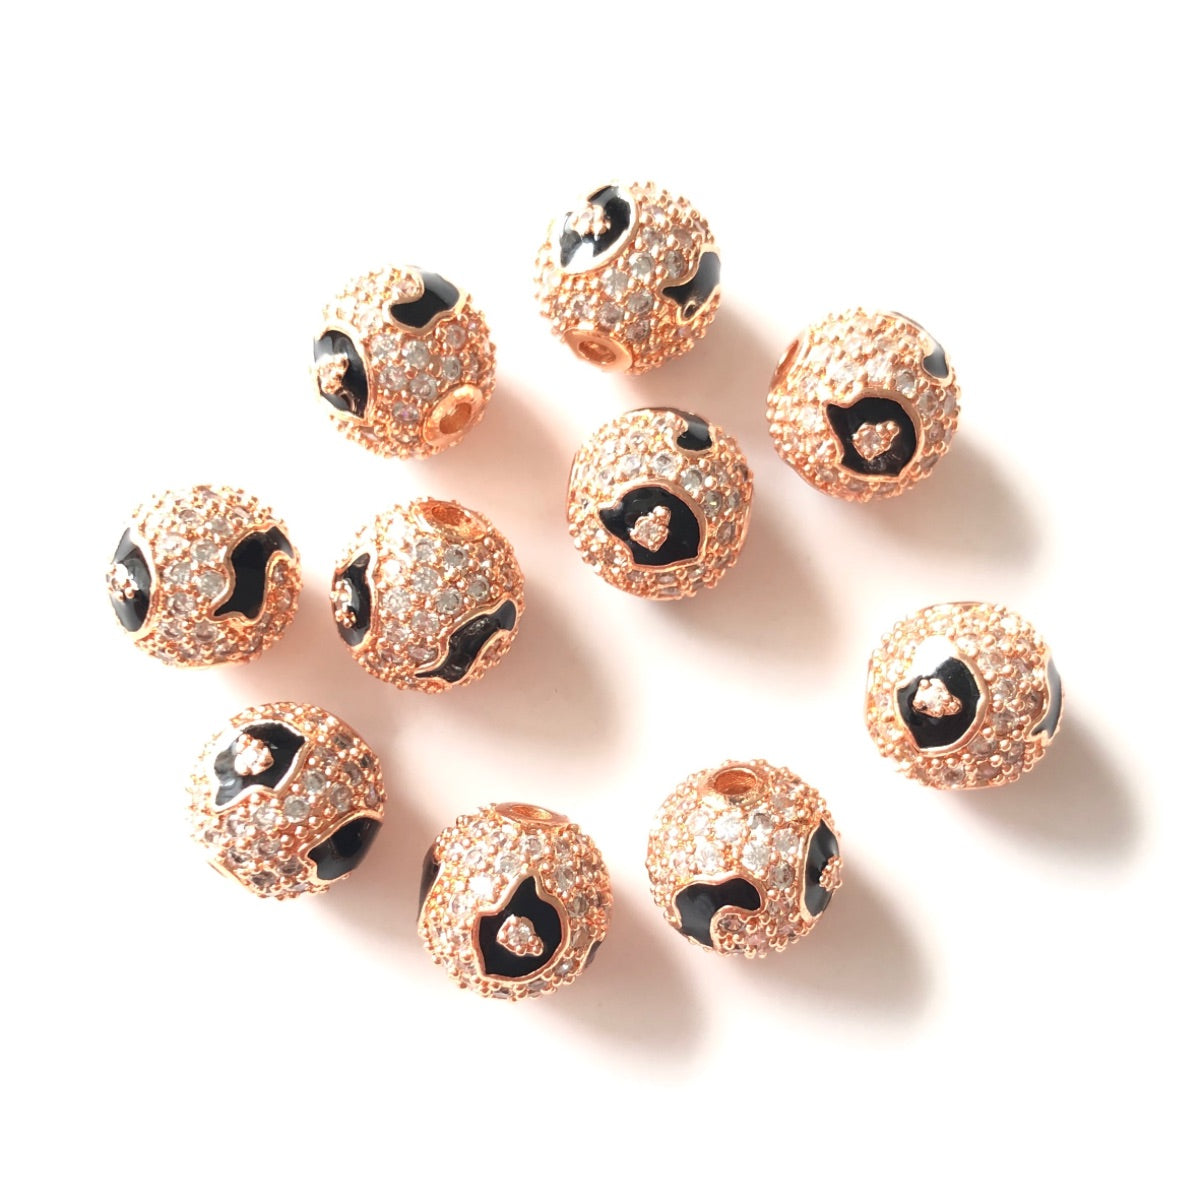 10-20-50pcs/lot 10mm Black Leopard Print Pattern CZ Paved Ball Spacers Beads Rose Gold CZ Paved Spacers 10mm Beads Ball Beads Leopard Printed New Spacers Arrivals Charms Beads Beyond